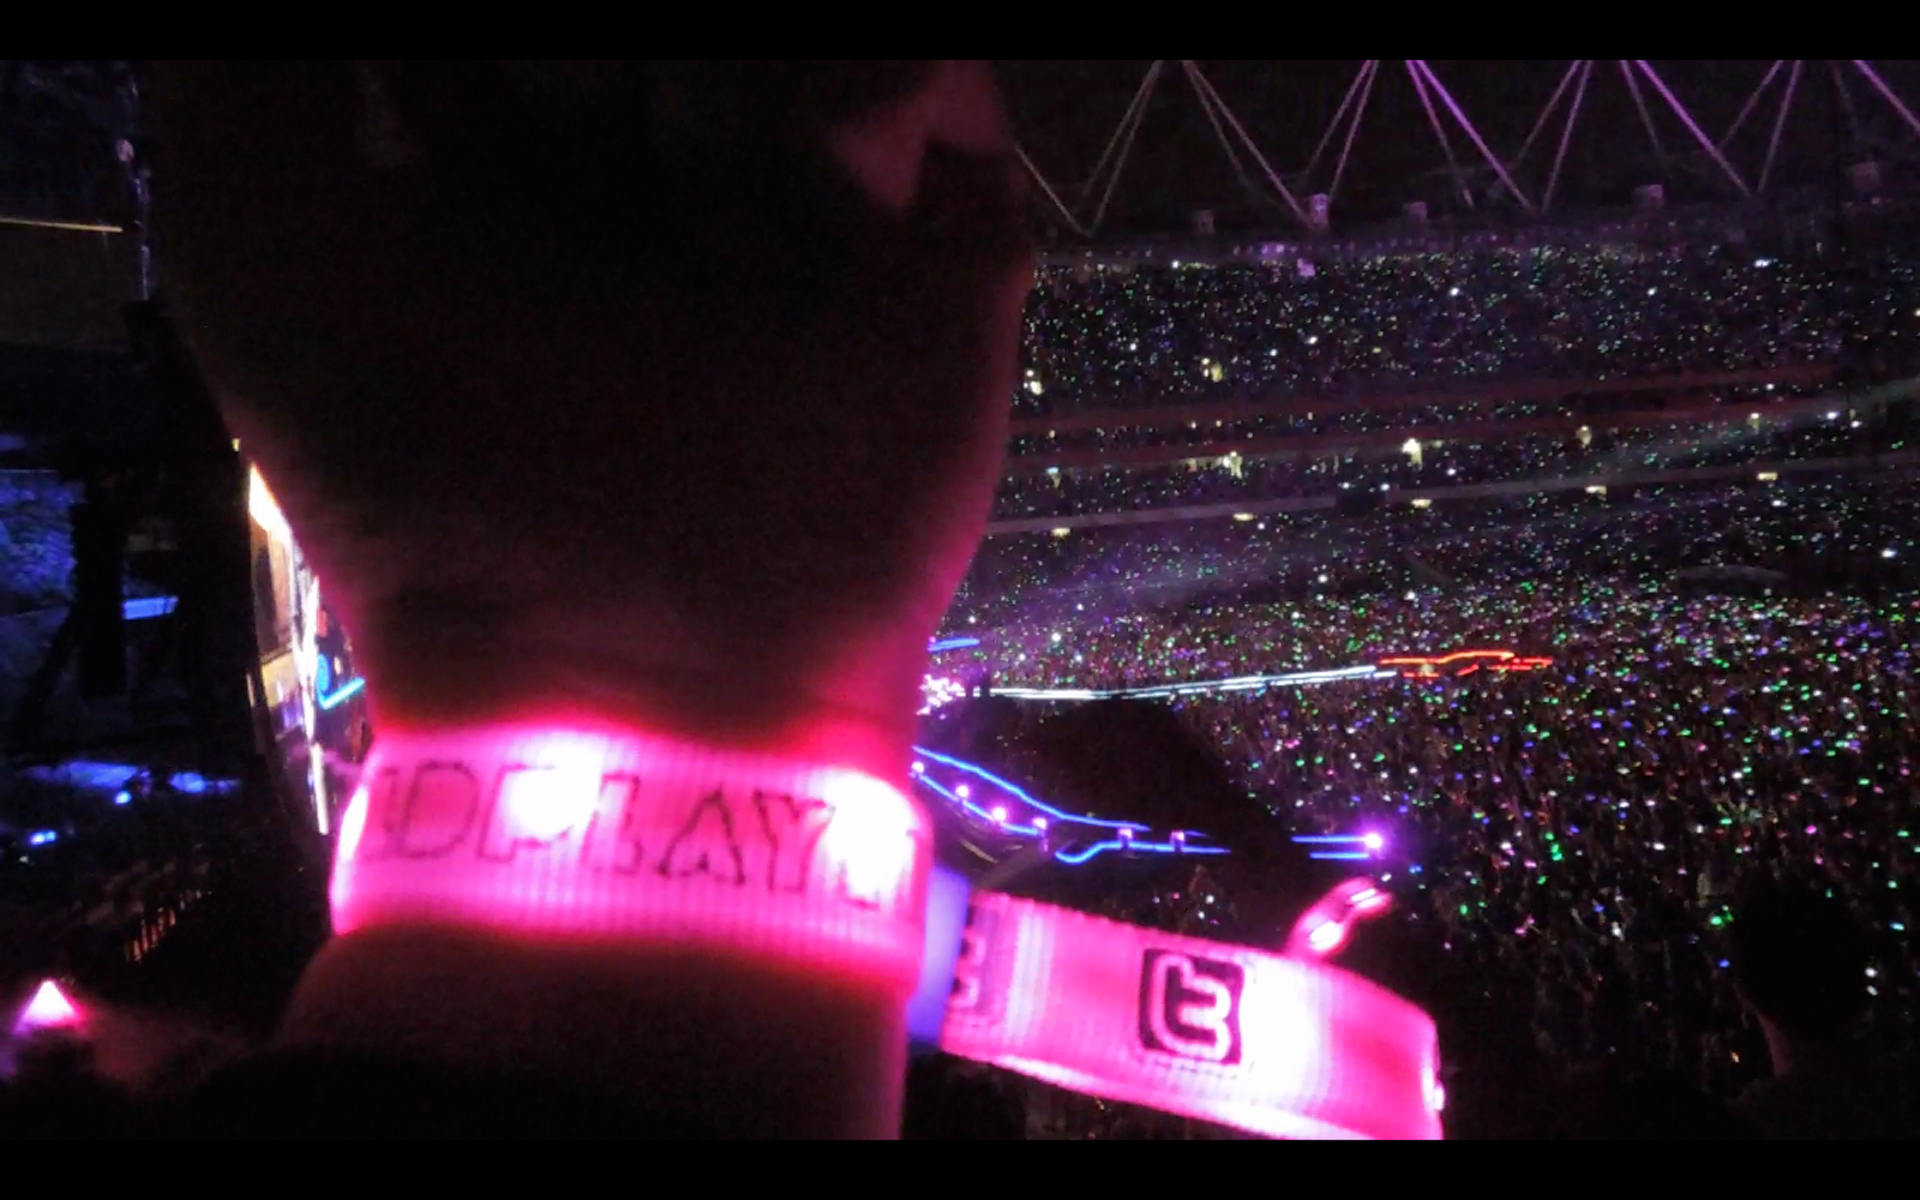 Coldplay: 'Our flashing wristbands cost us £400,000 a night'